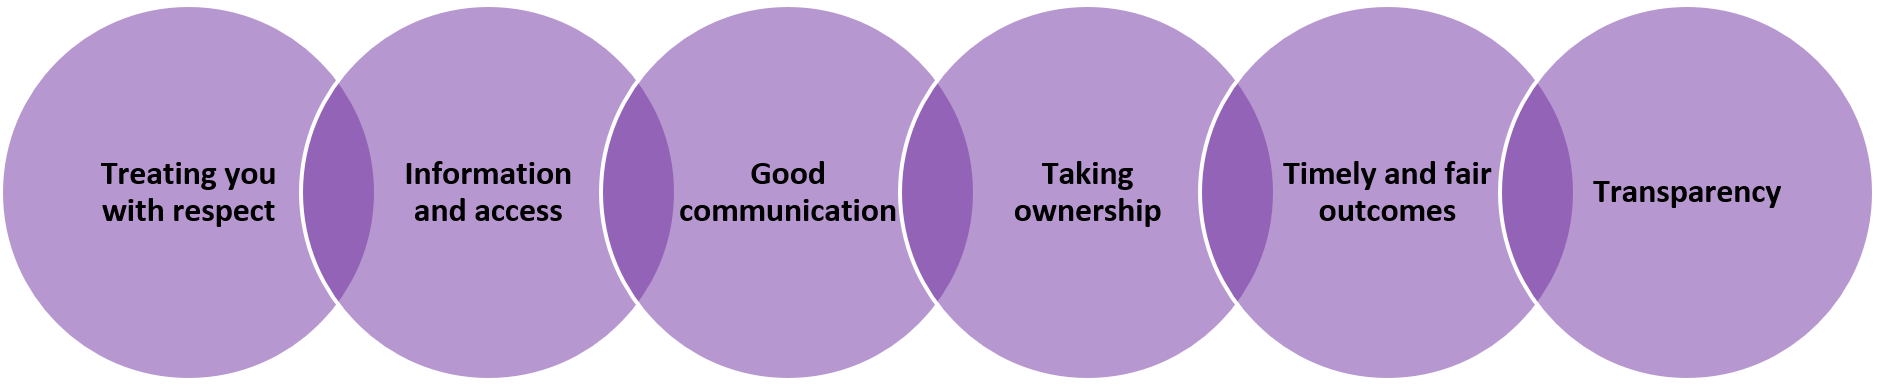 A series of 6 interlinking violet circles. Running from let to right the first circle represents "Treating you with respect", second "Information and access", third "Good communication", fourth "Taking ownership", fifth "Timely and fair outcomes and sixth "Transparency".